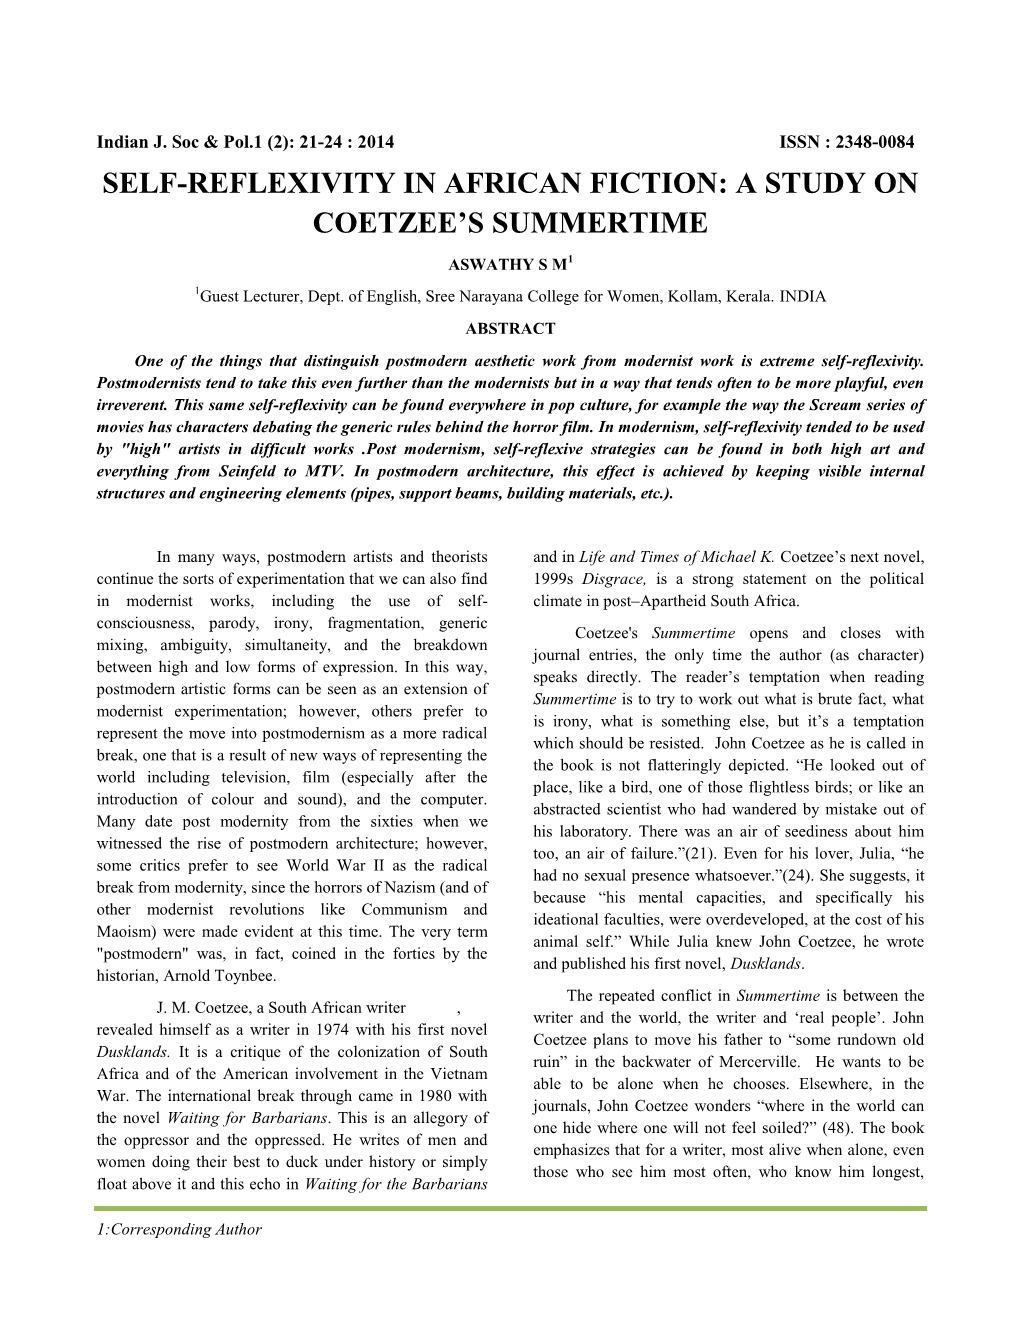 Self-Reflexivity in African Fiction: a Study on Coetzee’S Summertime